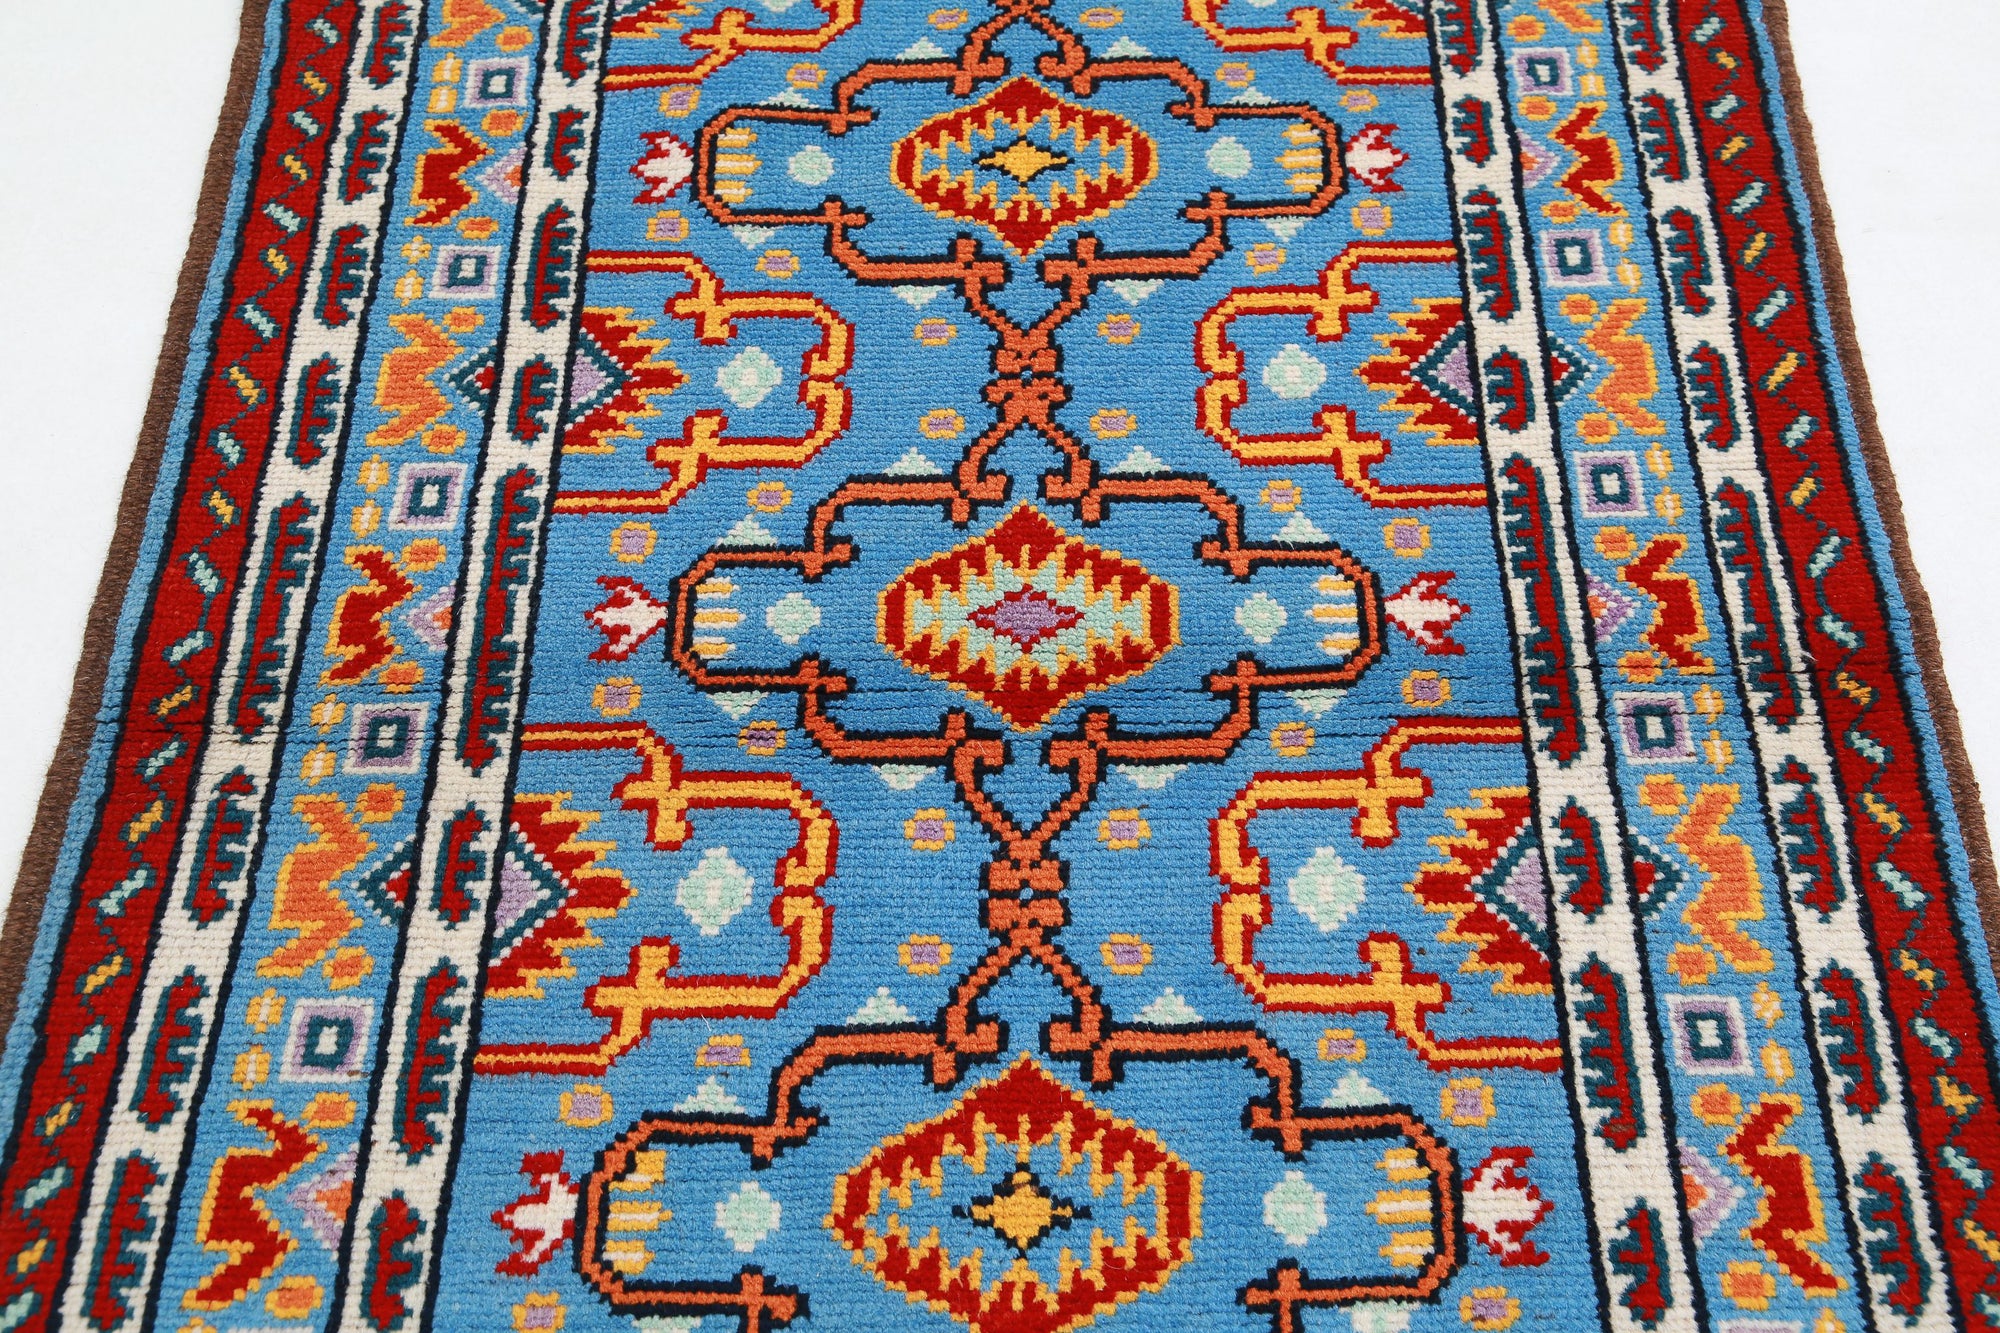 Revival-hand-knotted-qarghani-wool-rug-5014208-4.jpg